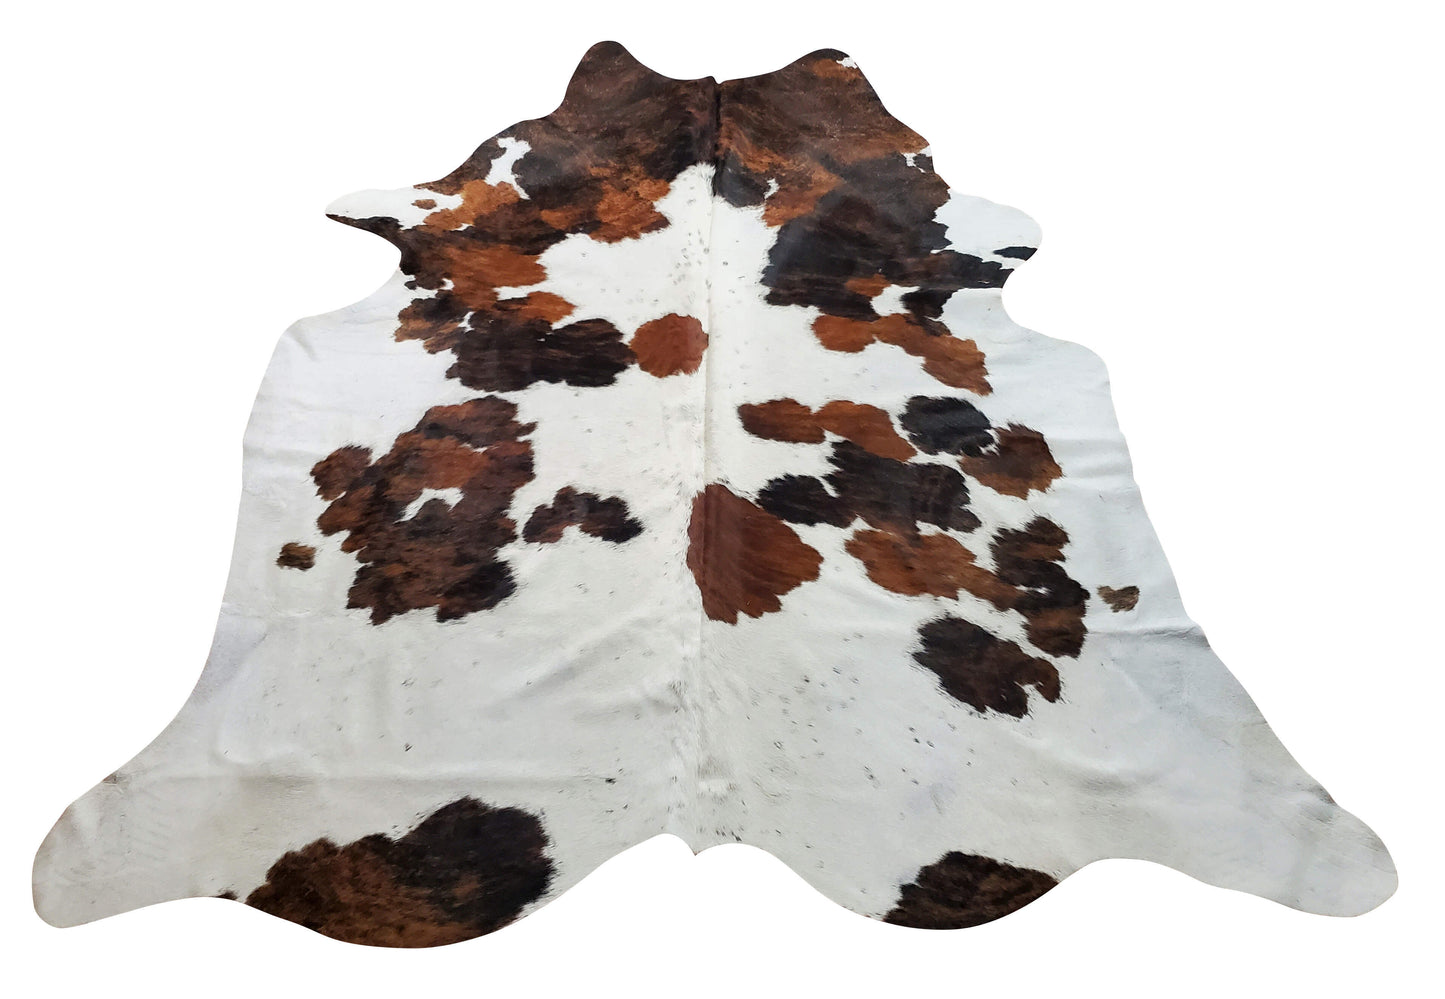 This type of cowhide rug is hand finished with exquisite design that can fit easily in high traffic area or rooms with high ceilings, it is natural, real and genuine. 